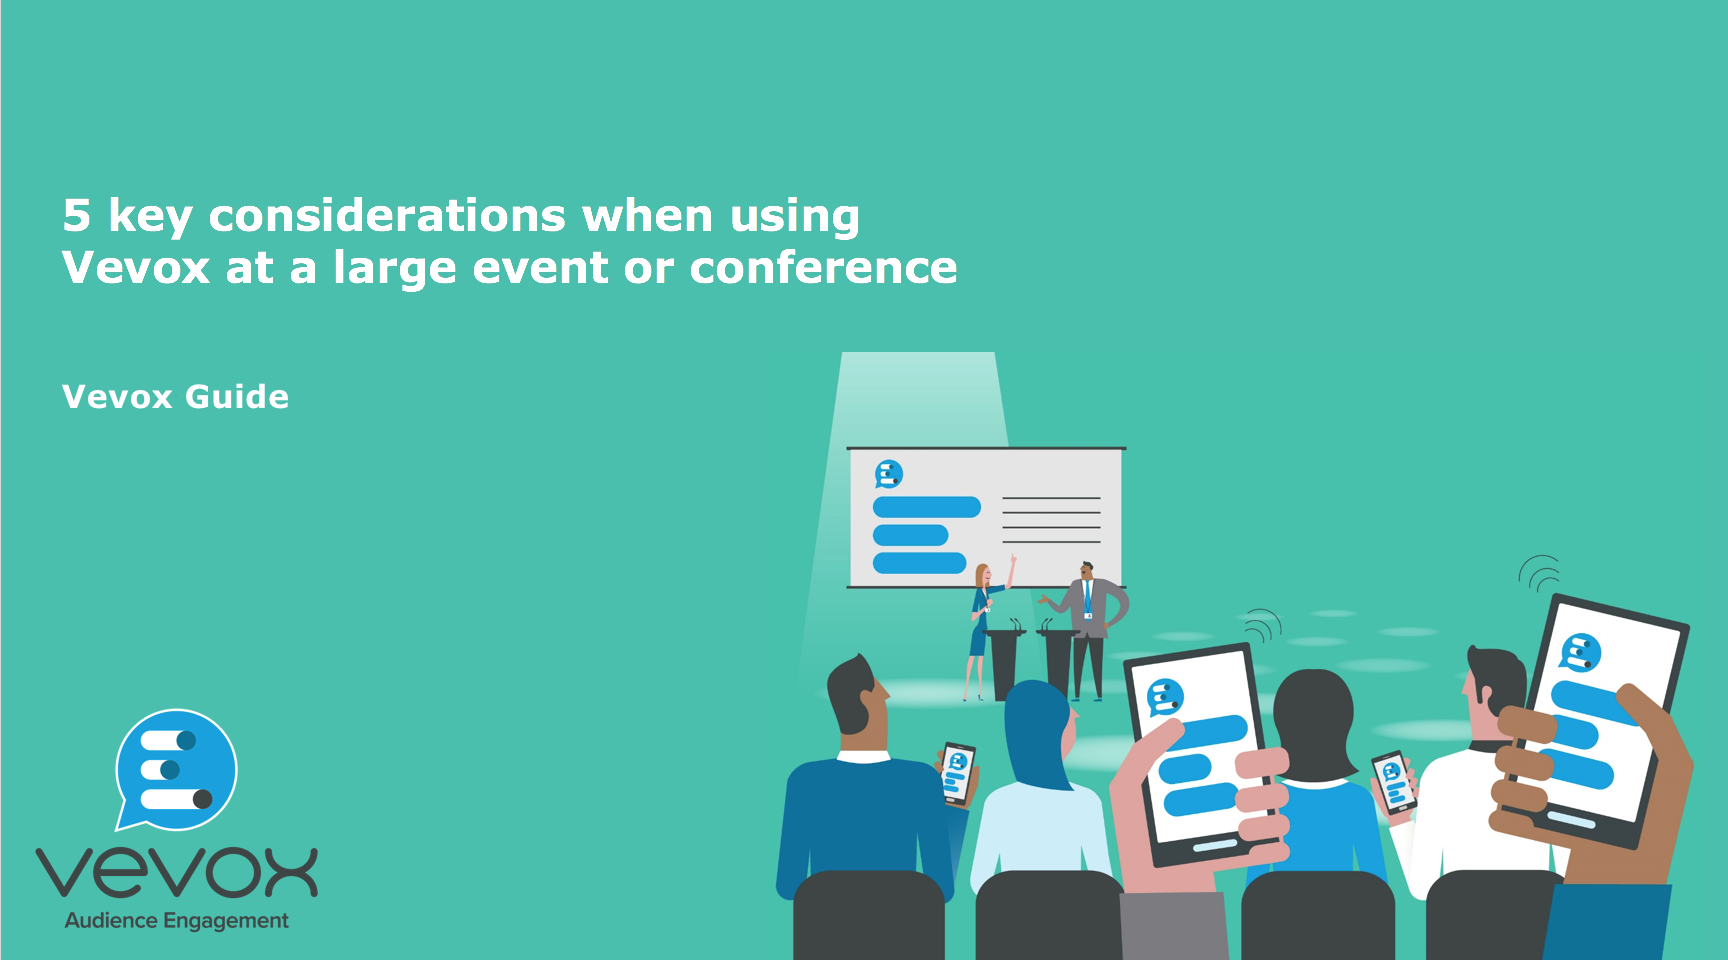 A guide for using Vevox at large meetings and events